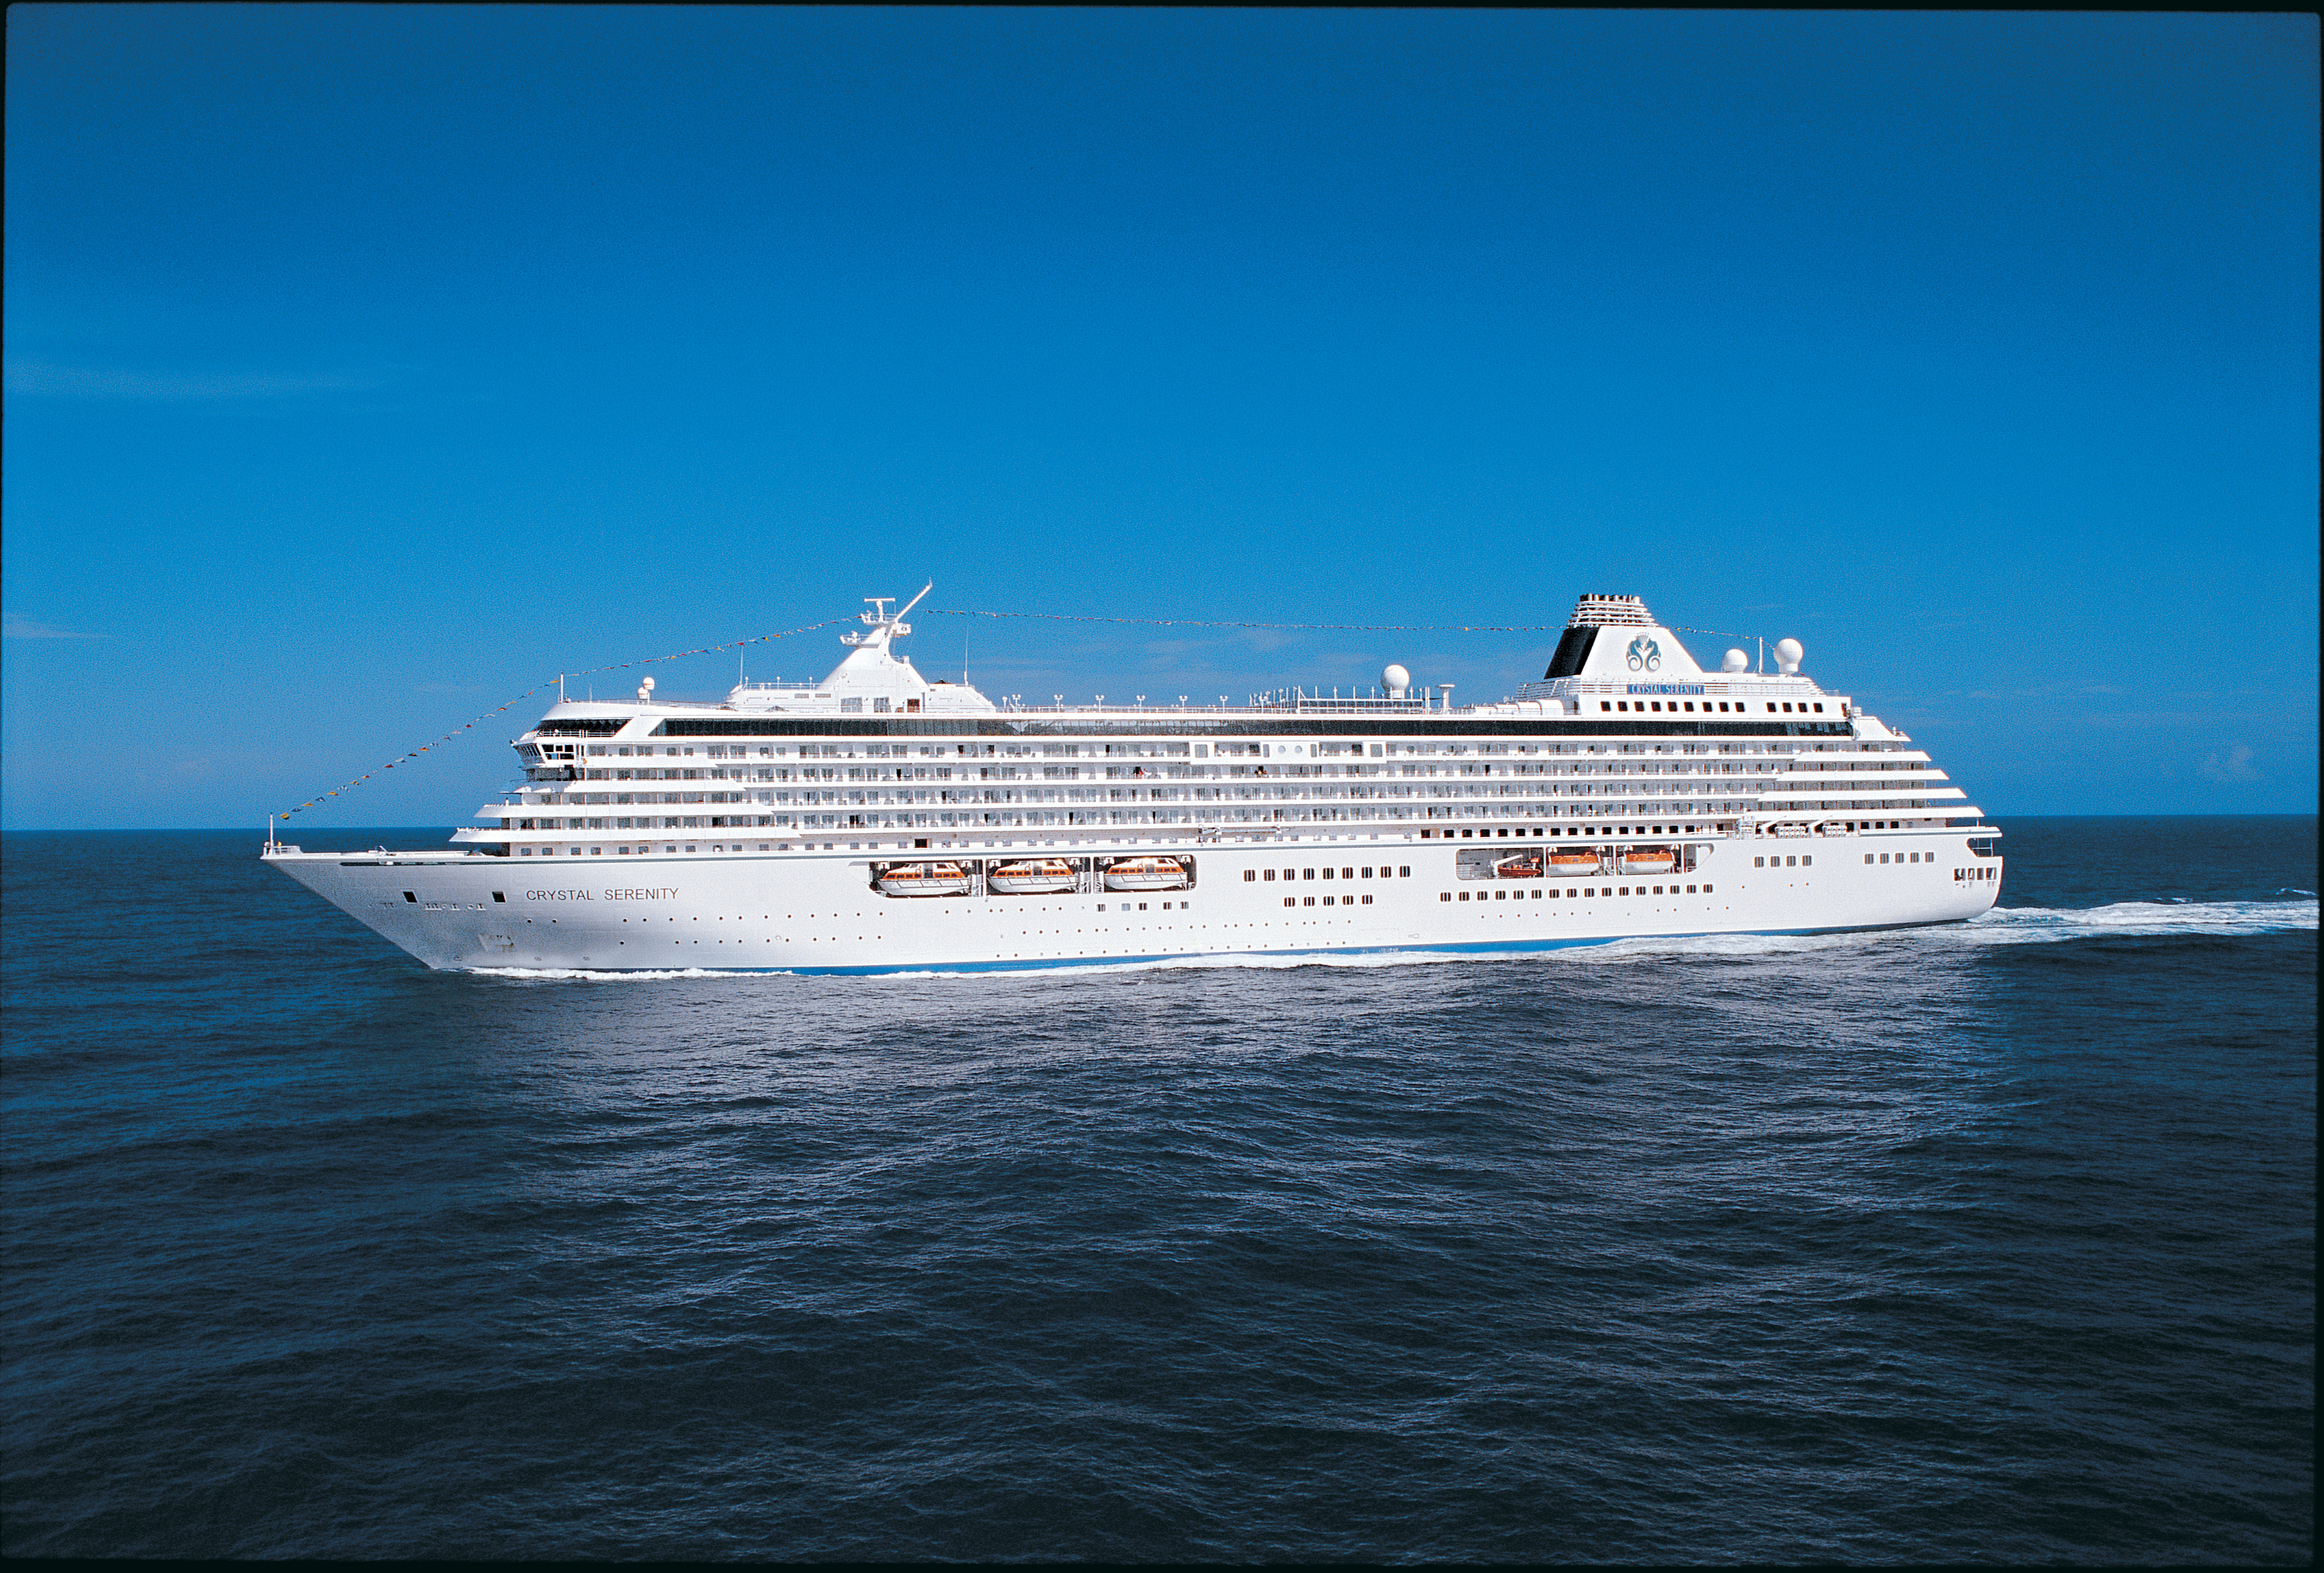 Crystal Cruises announces reduced deposits for select 2020